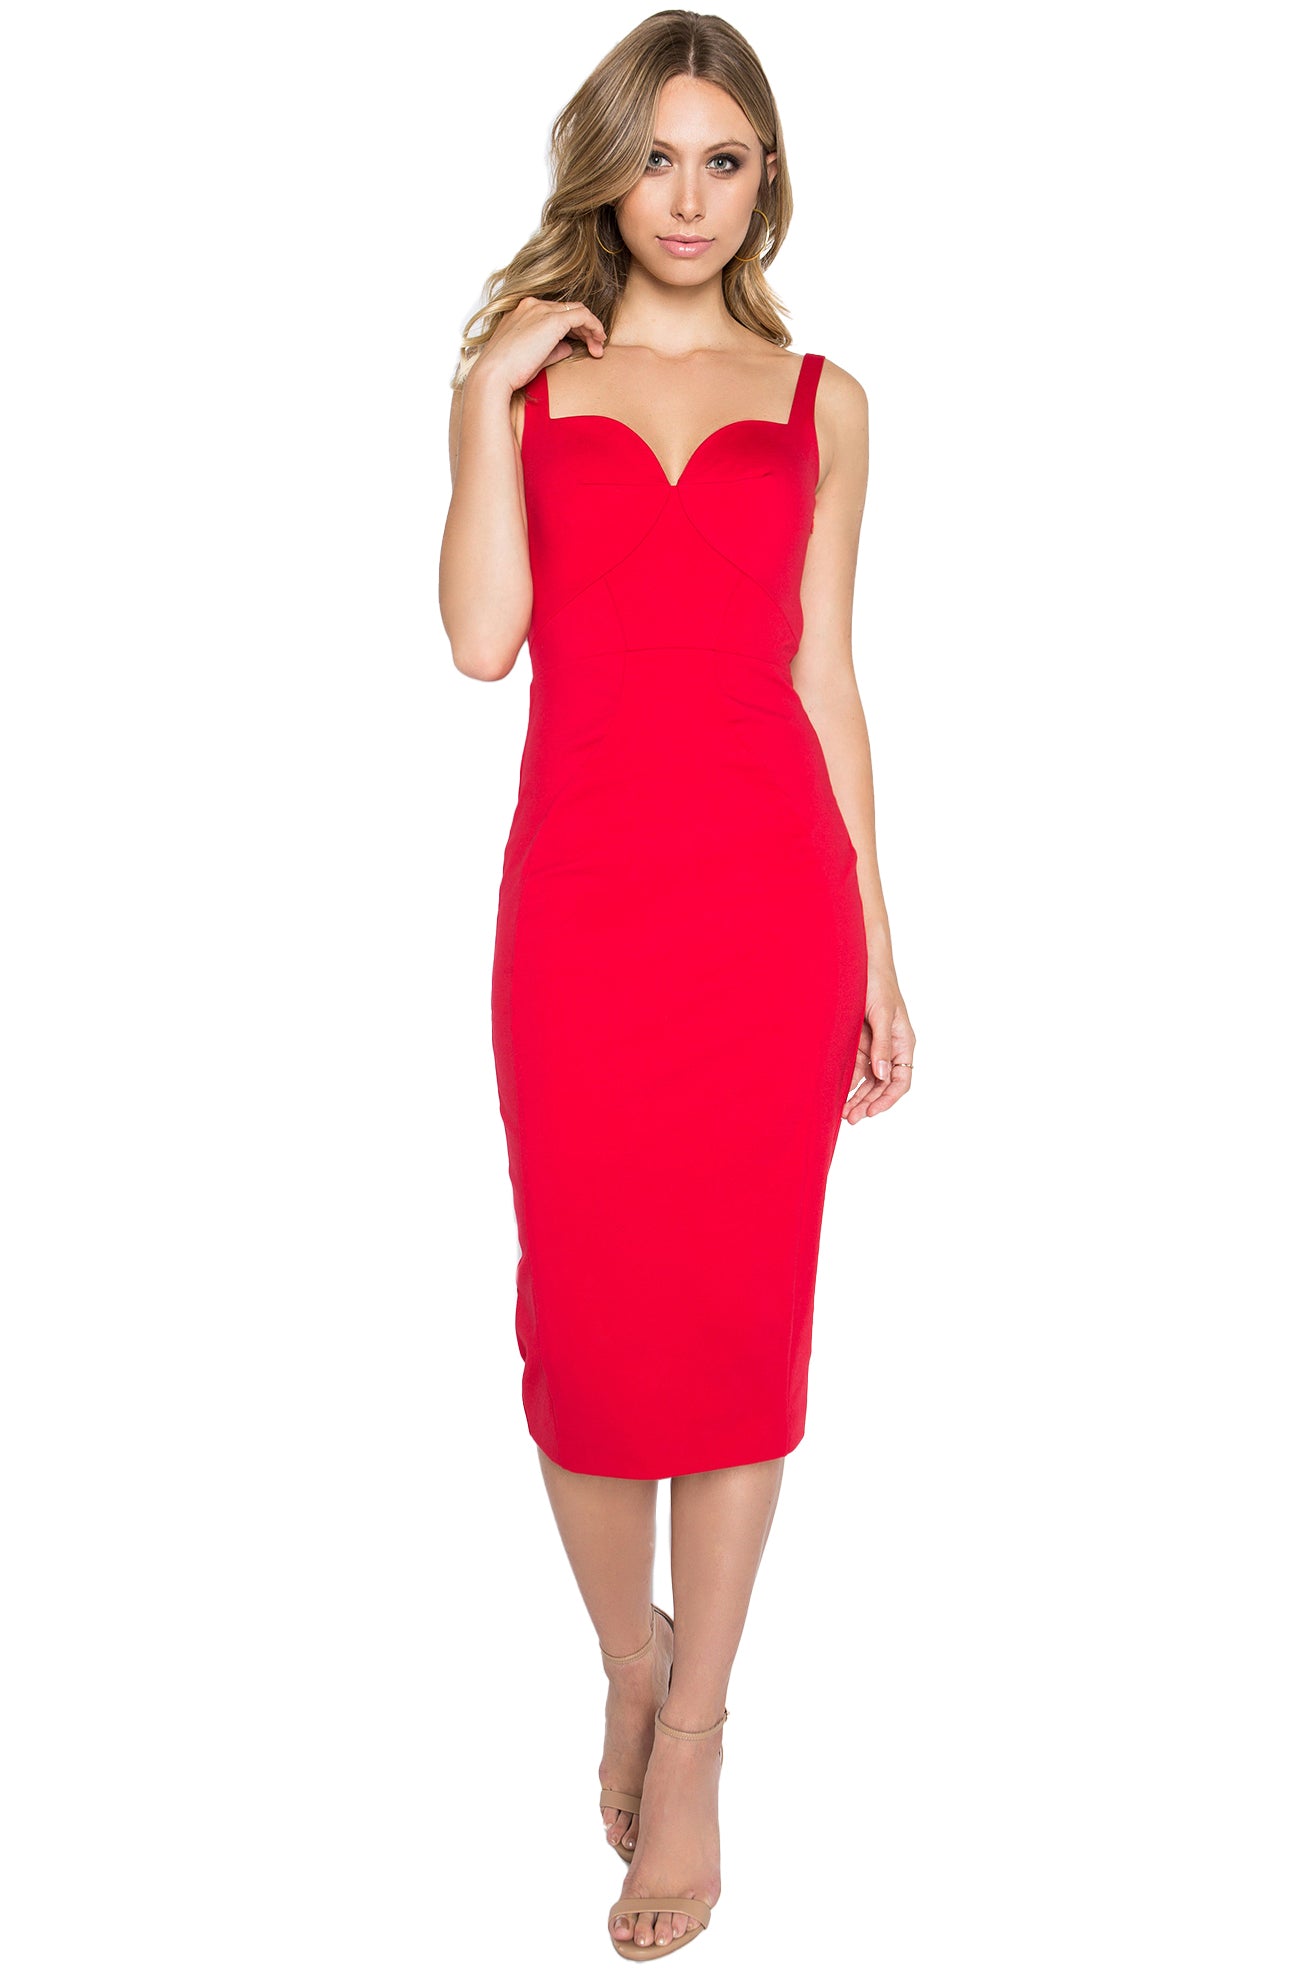 Front view of model wearing the Simona Maghen Homa Dress, red midi knit Ponte sleeveless dress with adjustable straps, sweetheart neckline, low back, and large bow at back waist.